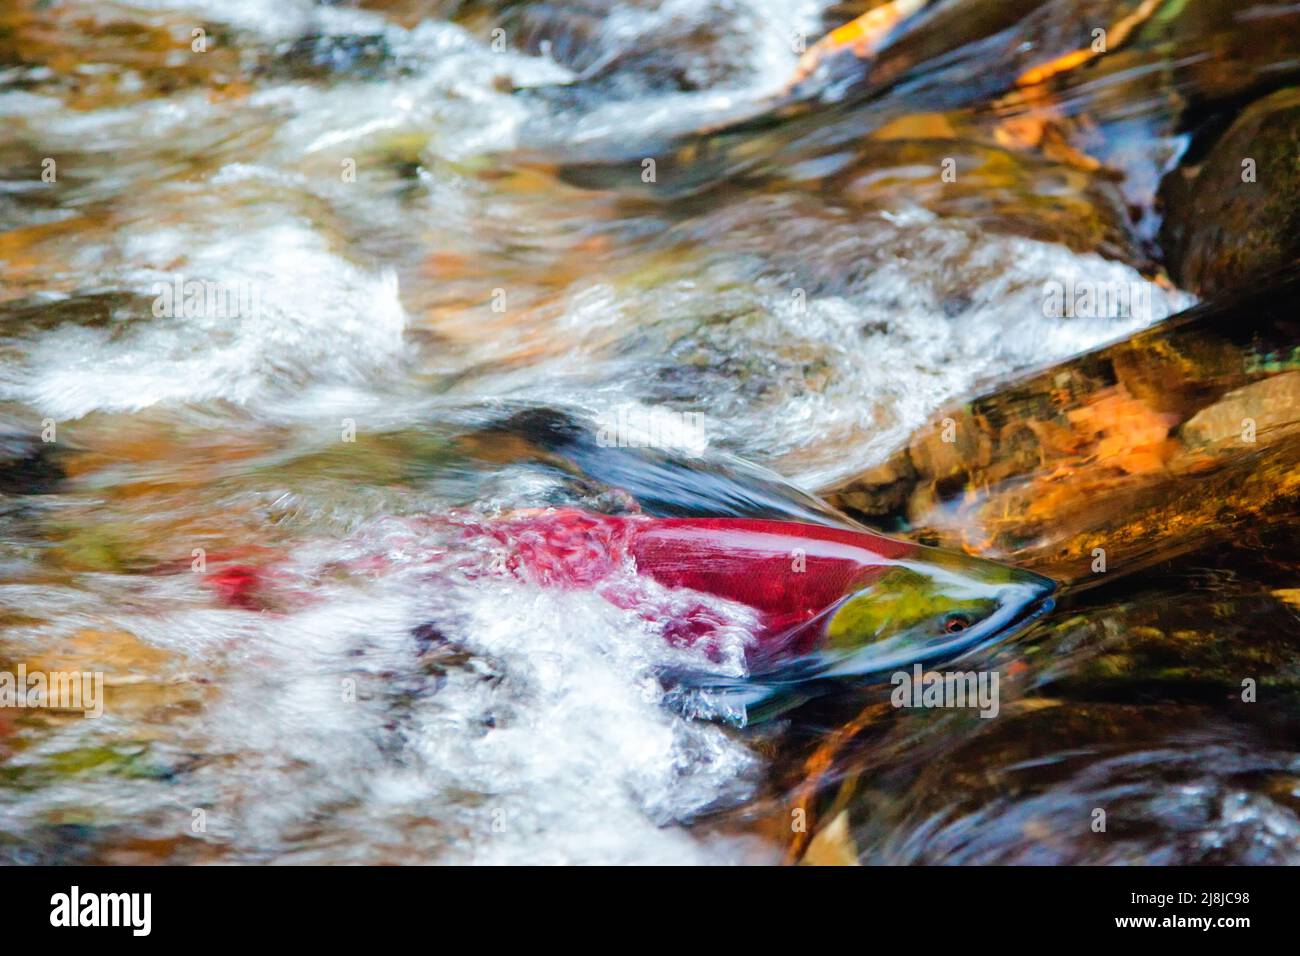 Spawing Sockeye Salmon fighting against the current, British Columbia, Canada Stock Photo